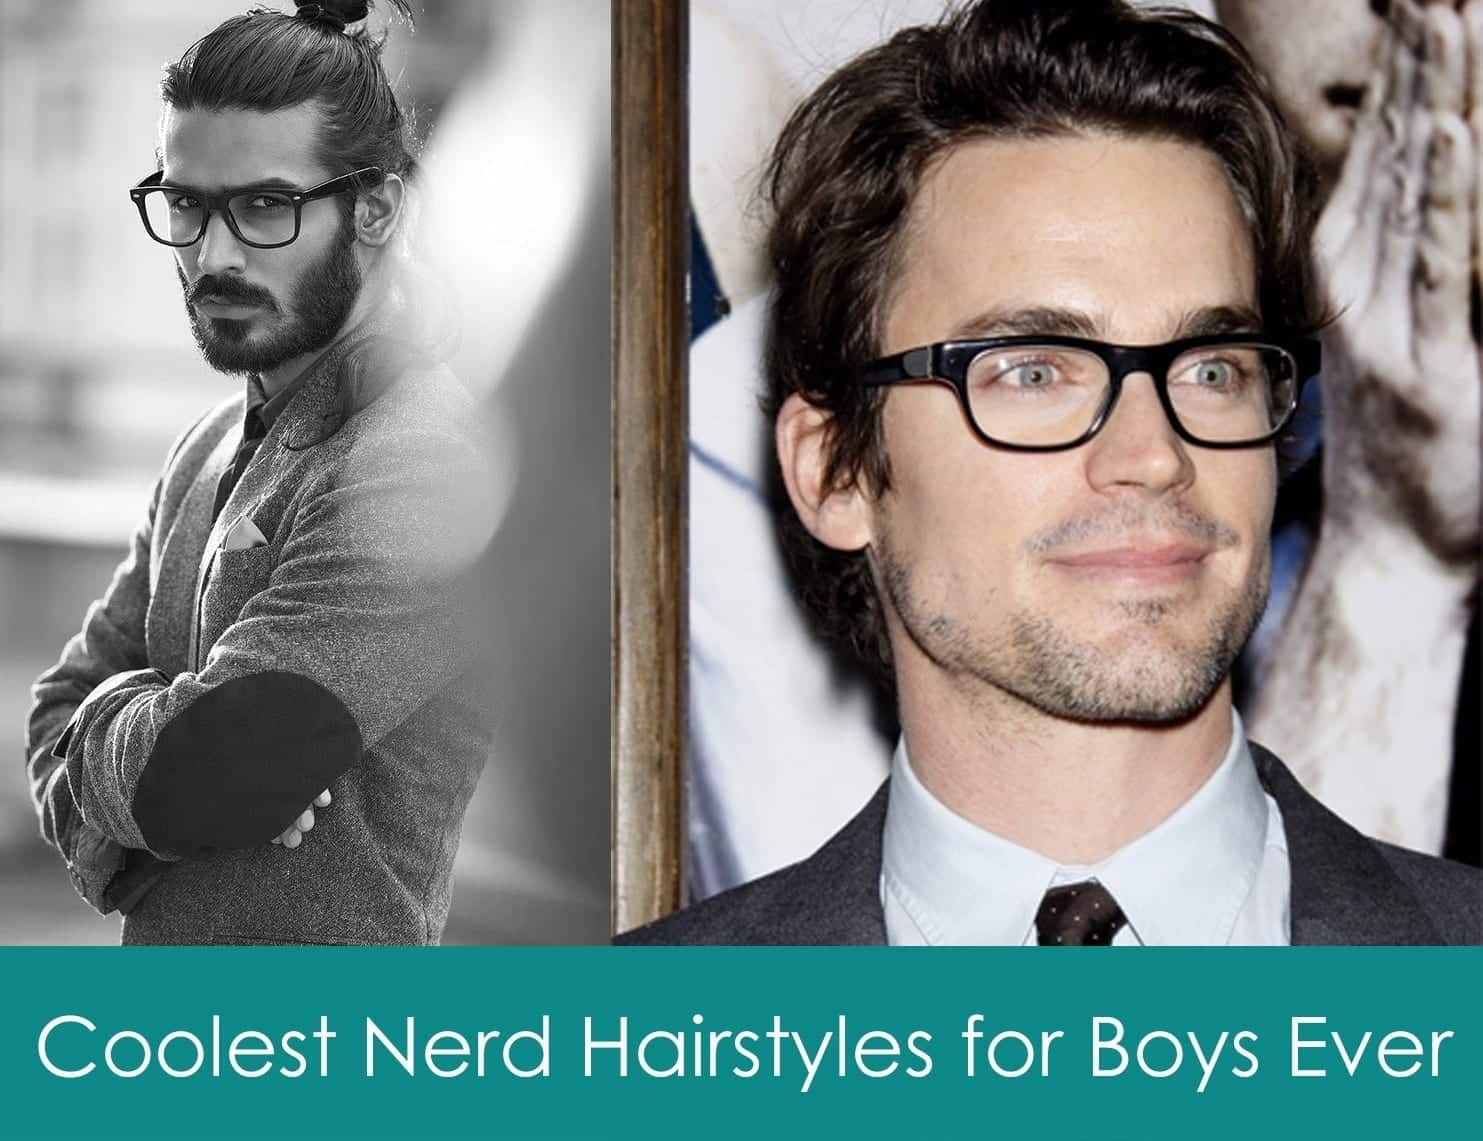 Cute Nerd Hairstyles for Boys – 18 Hairstyles For Nerdy Look